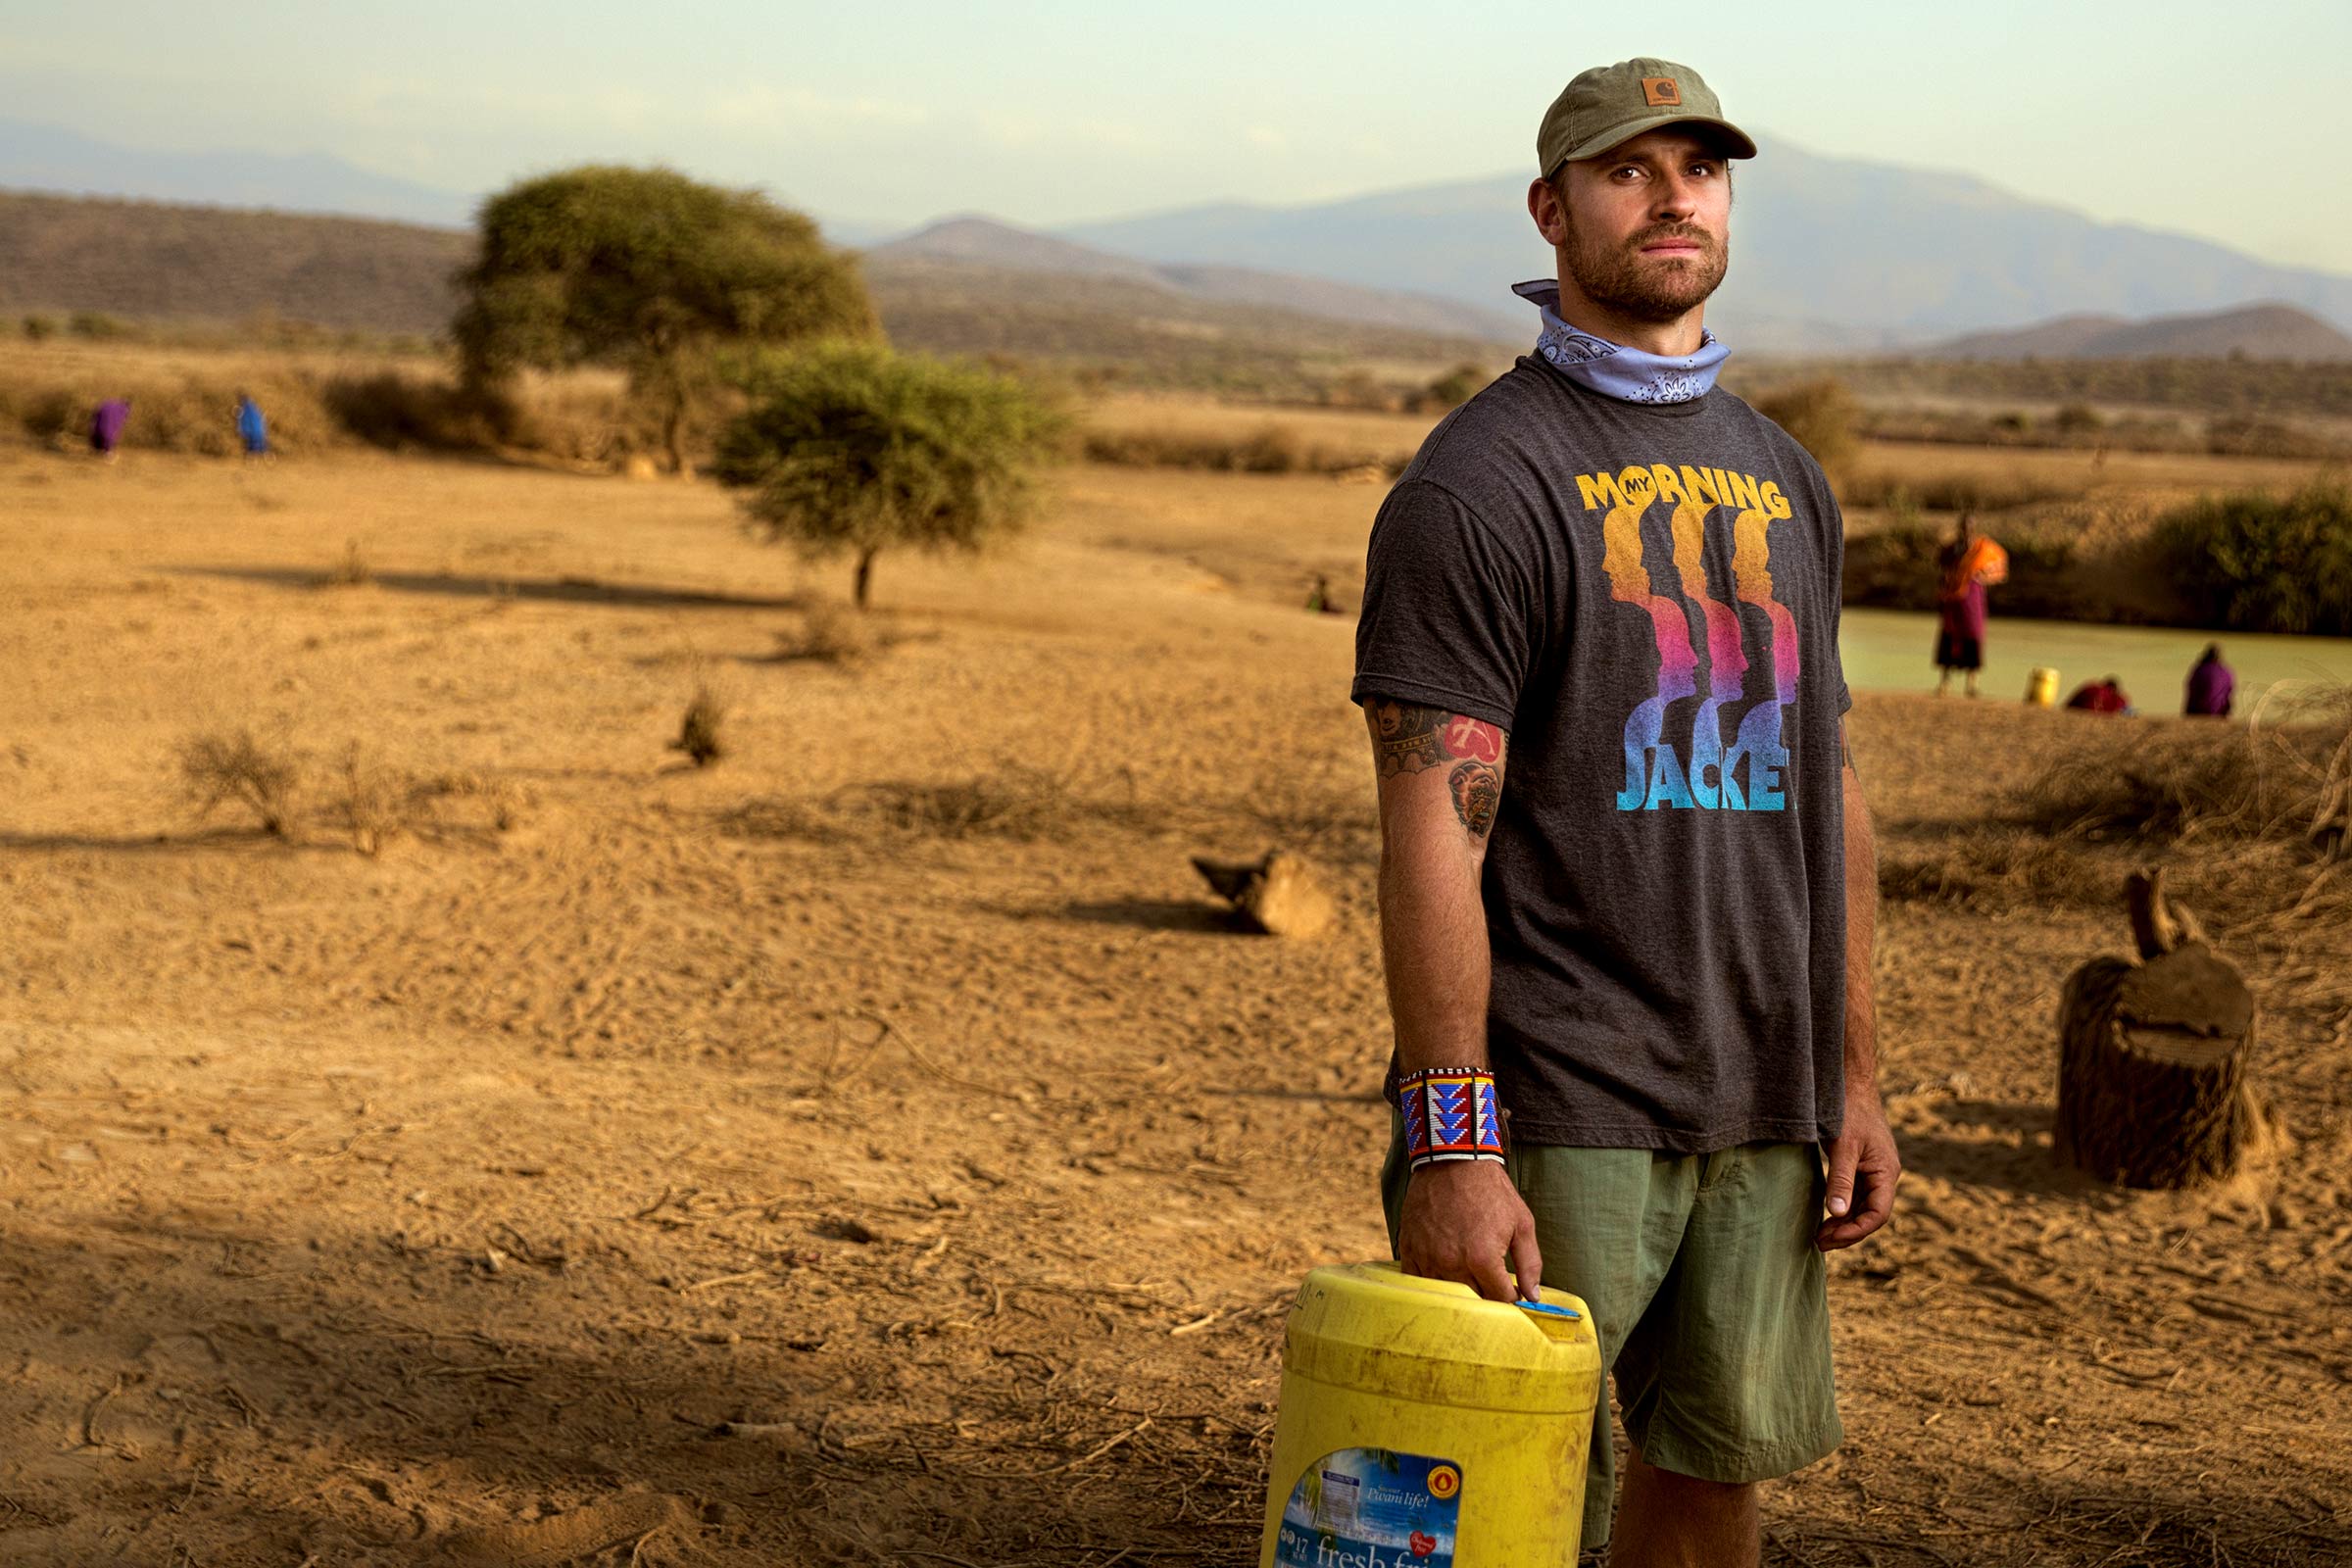 Chris Long holding a yellow bucket of water looking at the camera